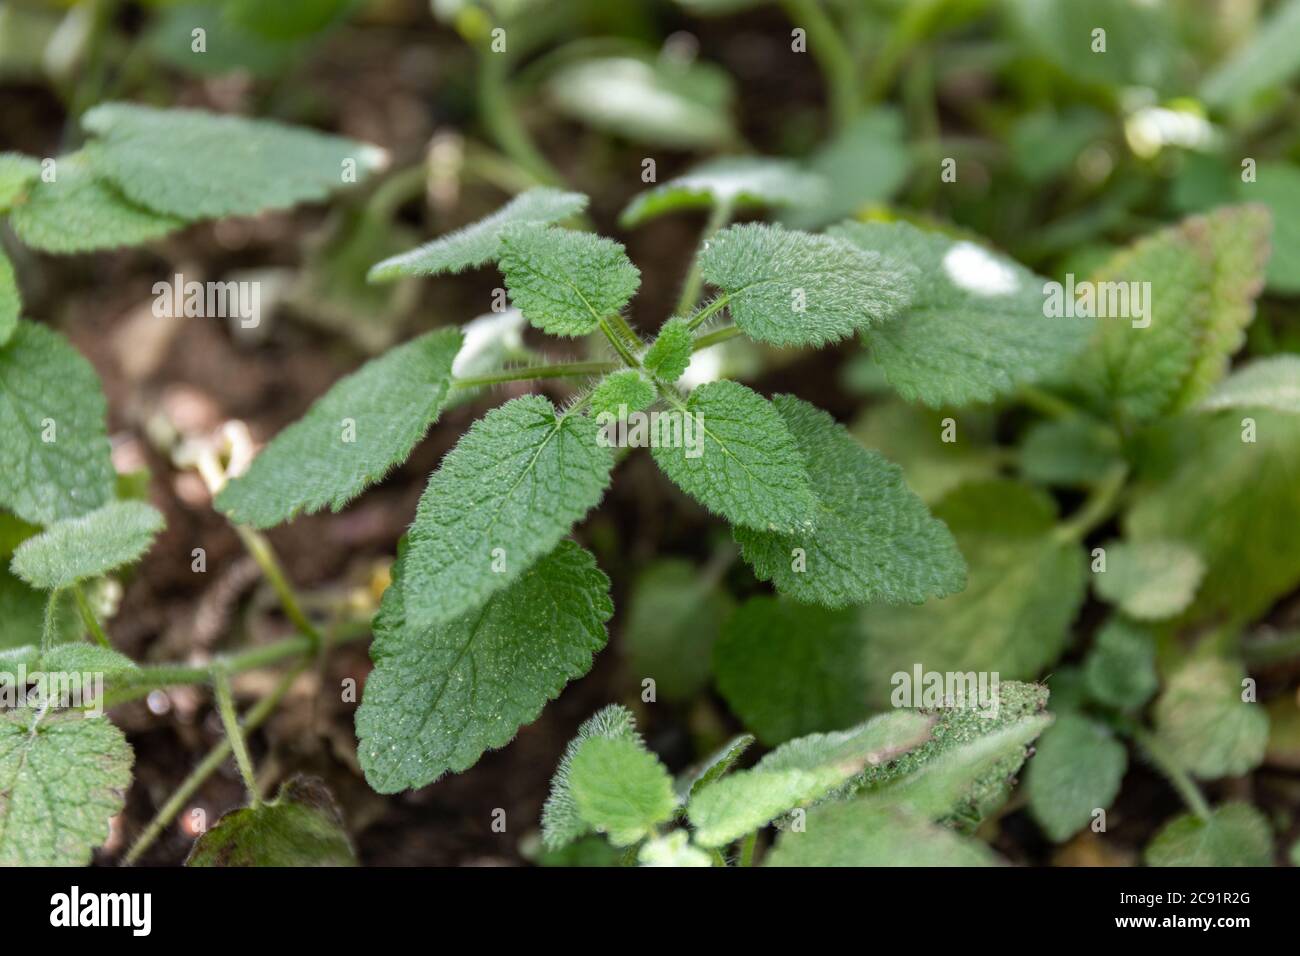 Green leaves of Clinopodium nepeta (synonym Calamintha nepeta), known as lesser calamint Stock Photo